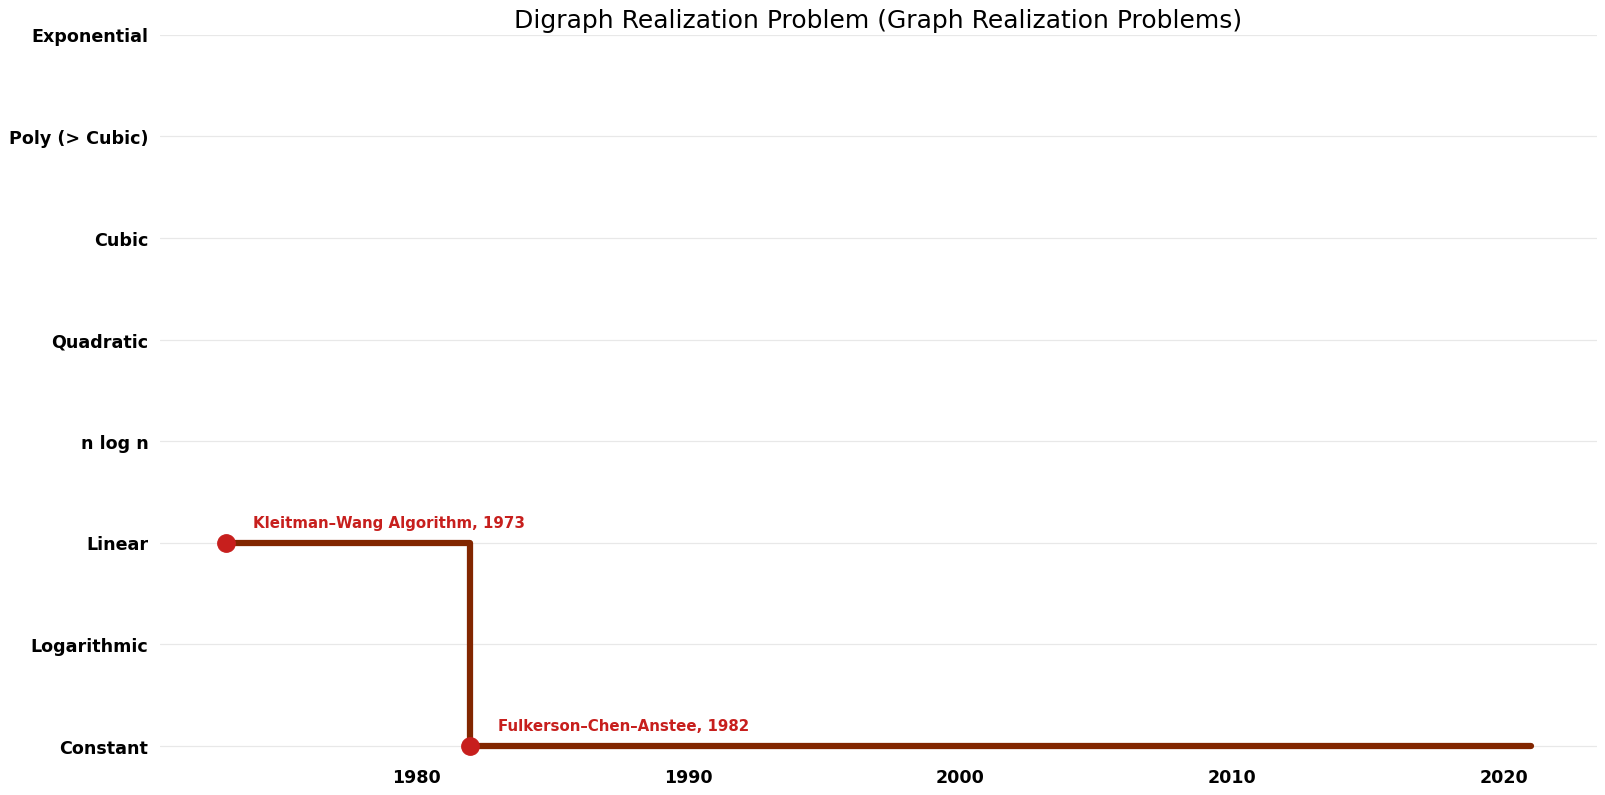 File:Graph Realization Problems - Digraph Realization Problem - Space.png